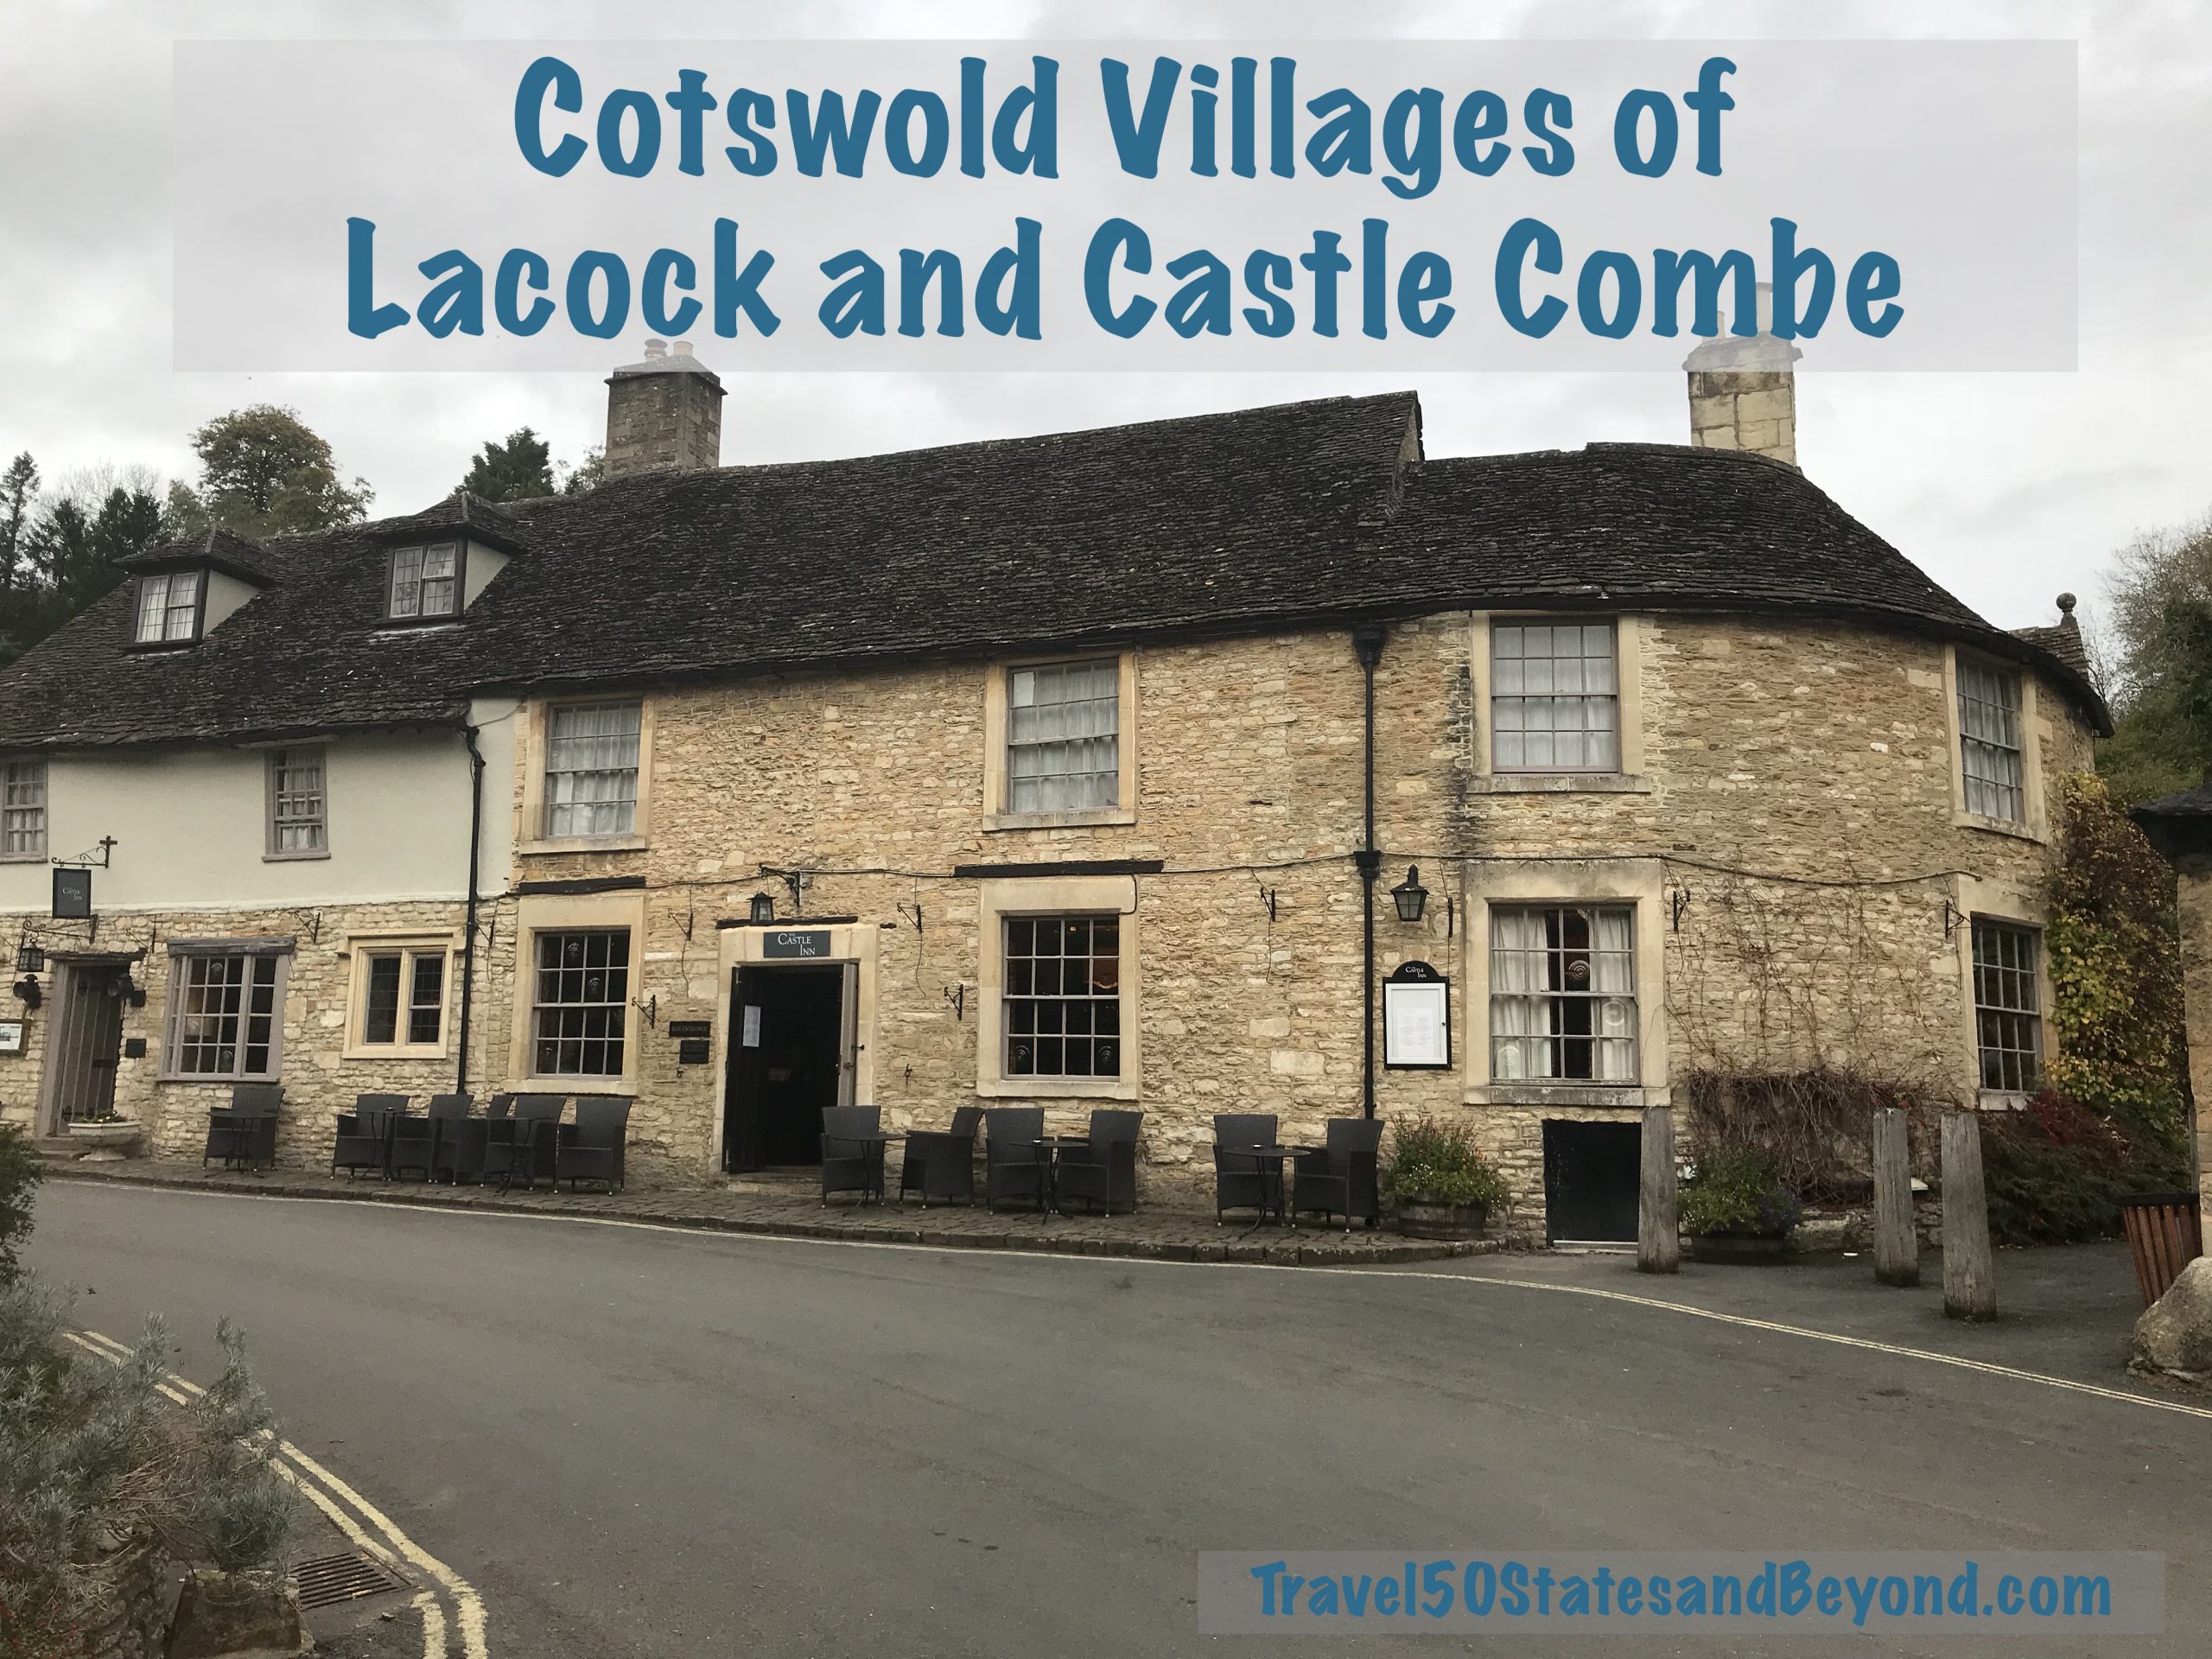 Cotswold Villages of Lacock & Castle Combe, England